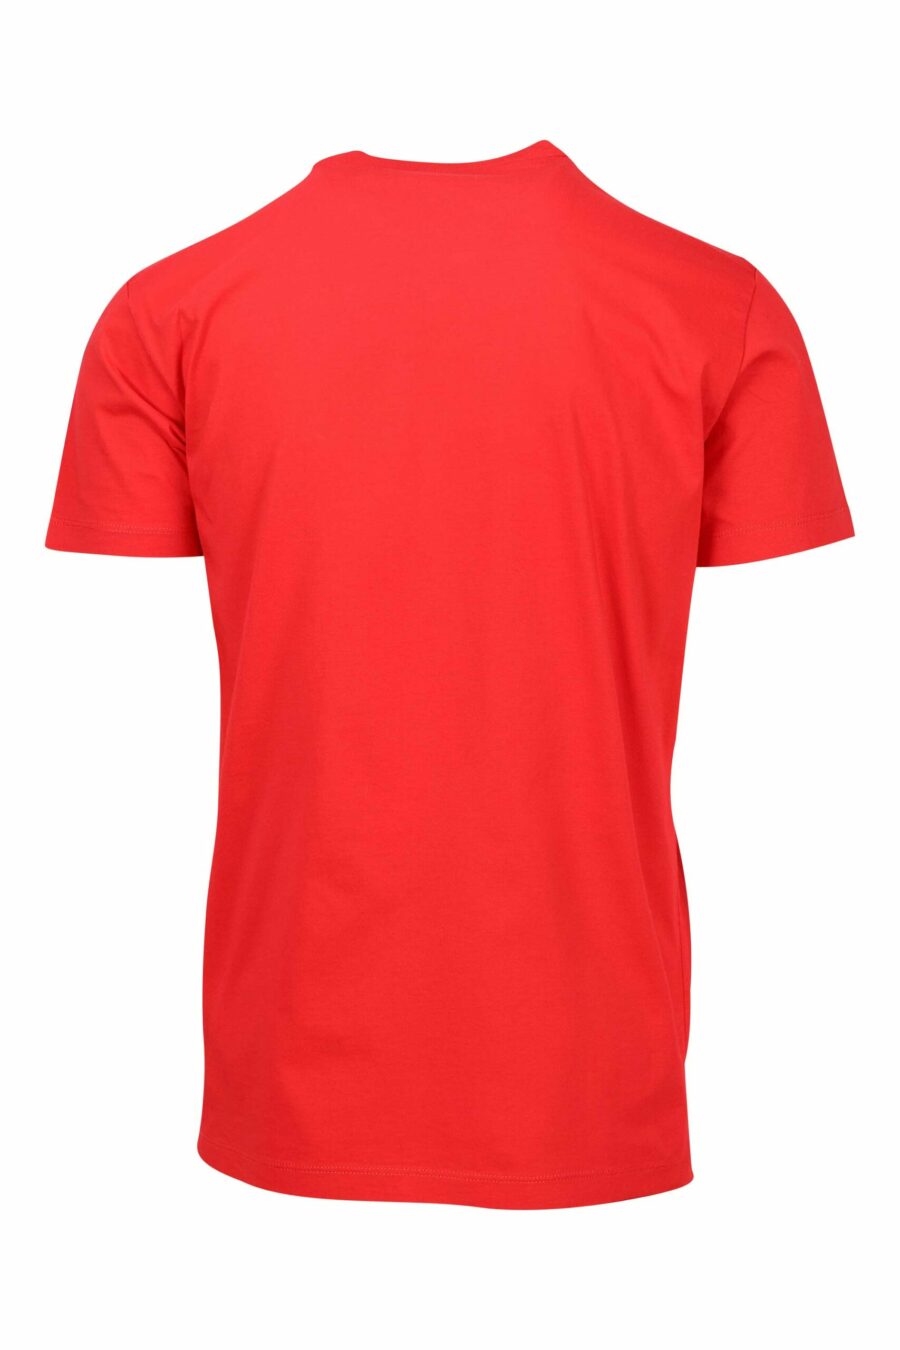 Red T-shirt with small logo "ceresio 9" - 8052134197134 1 scaled